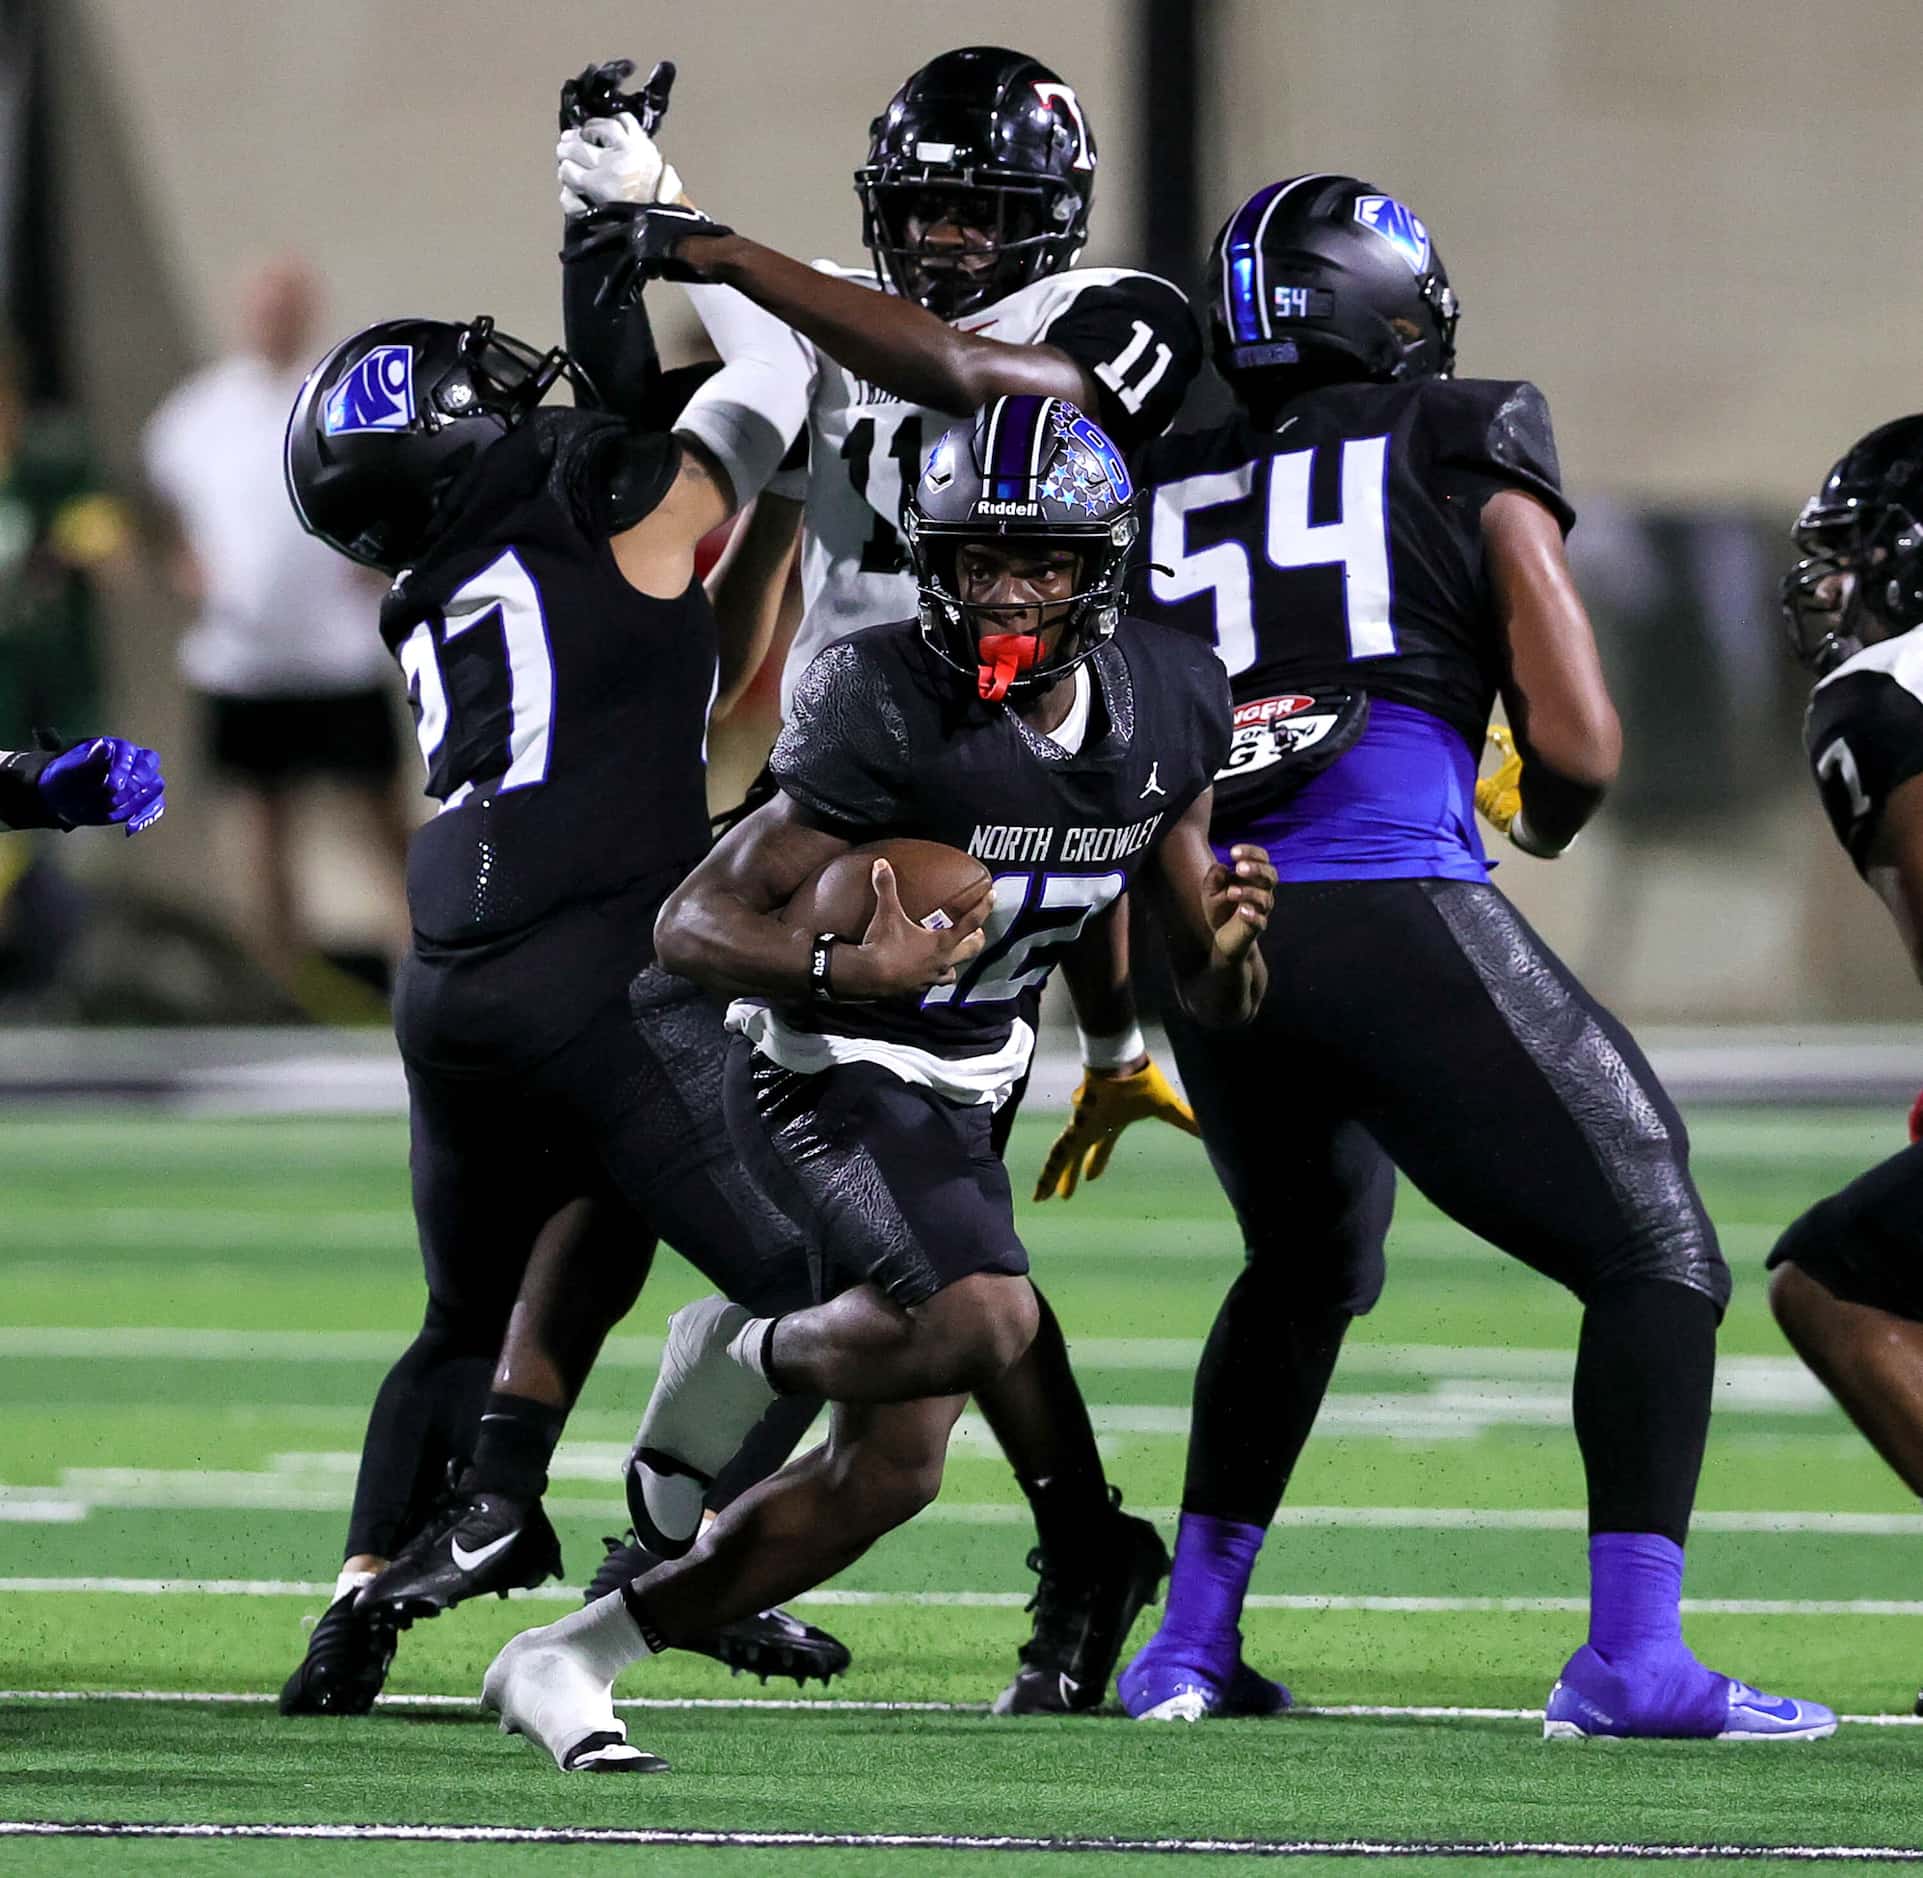 North Crowley quarterback Chris Jimerson Jr. (12) looks for running room against Euless...